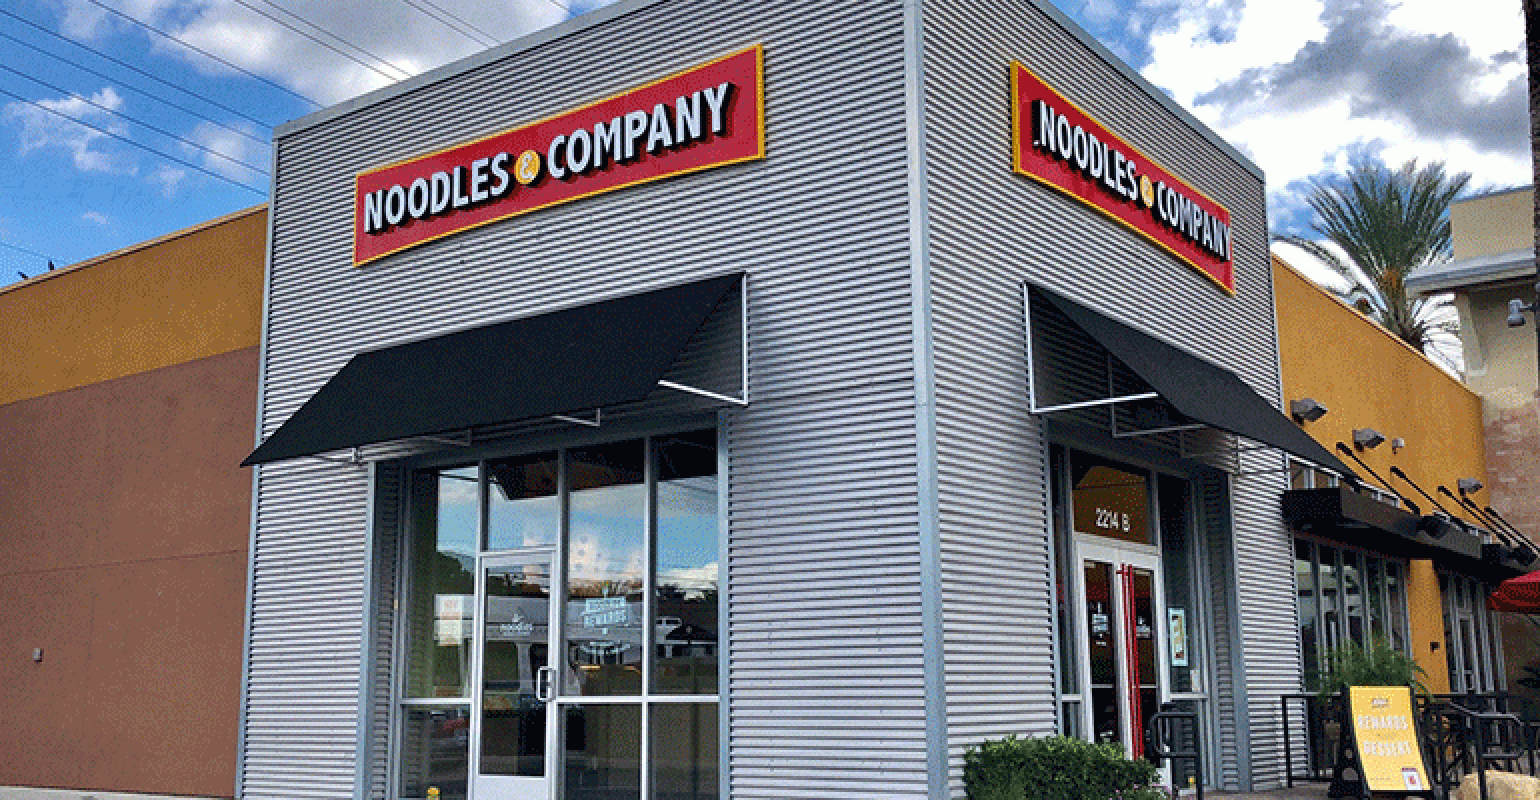 Noodles & Company franchisee Patti Neely wants to inspire more women to become franchisees